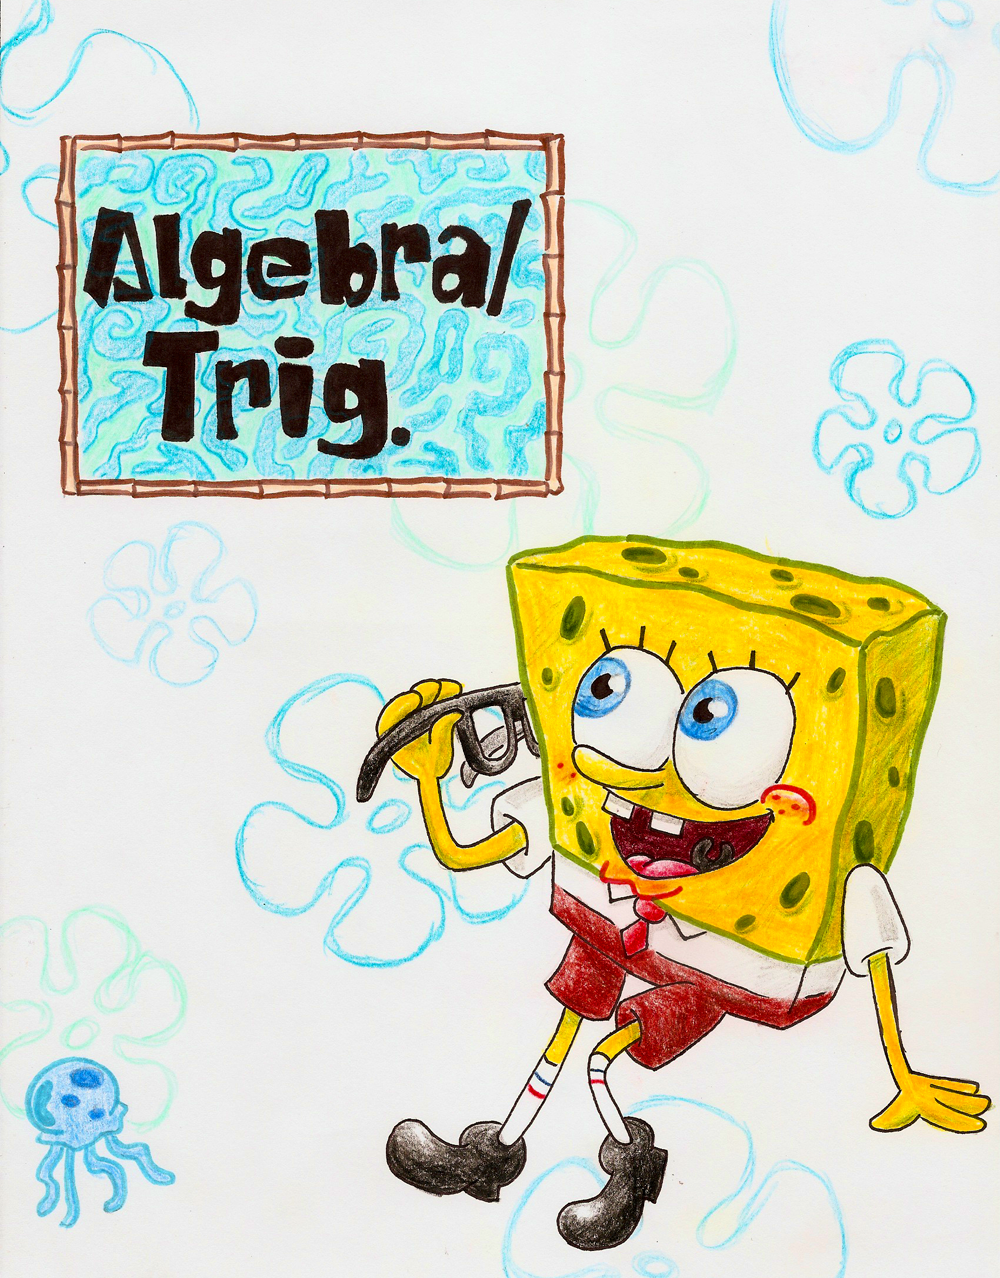 Algebra/Trig cover by silly_rules